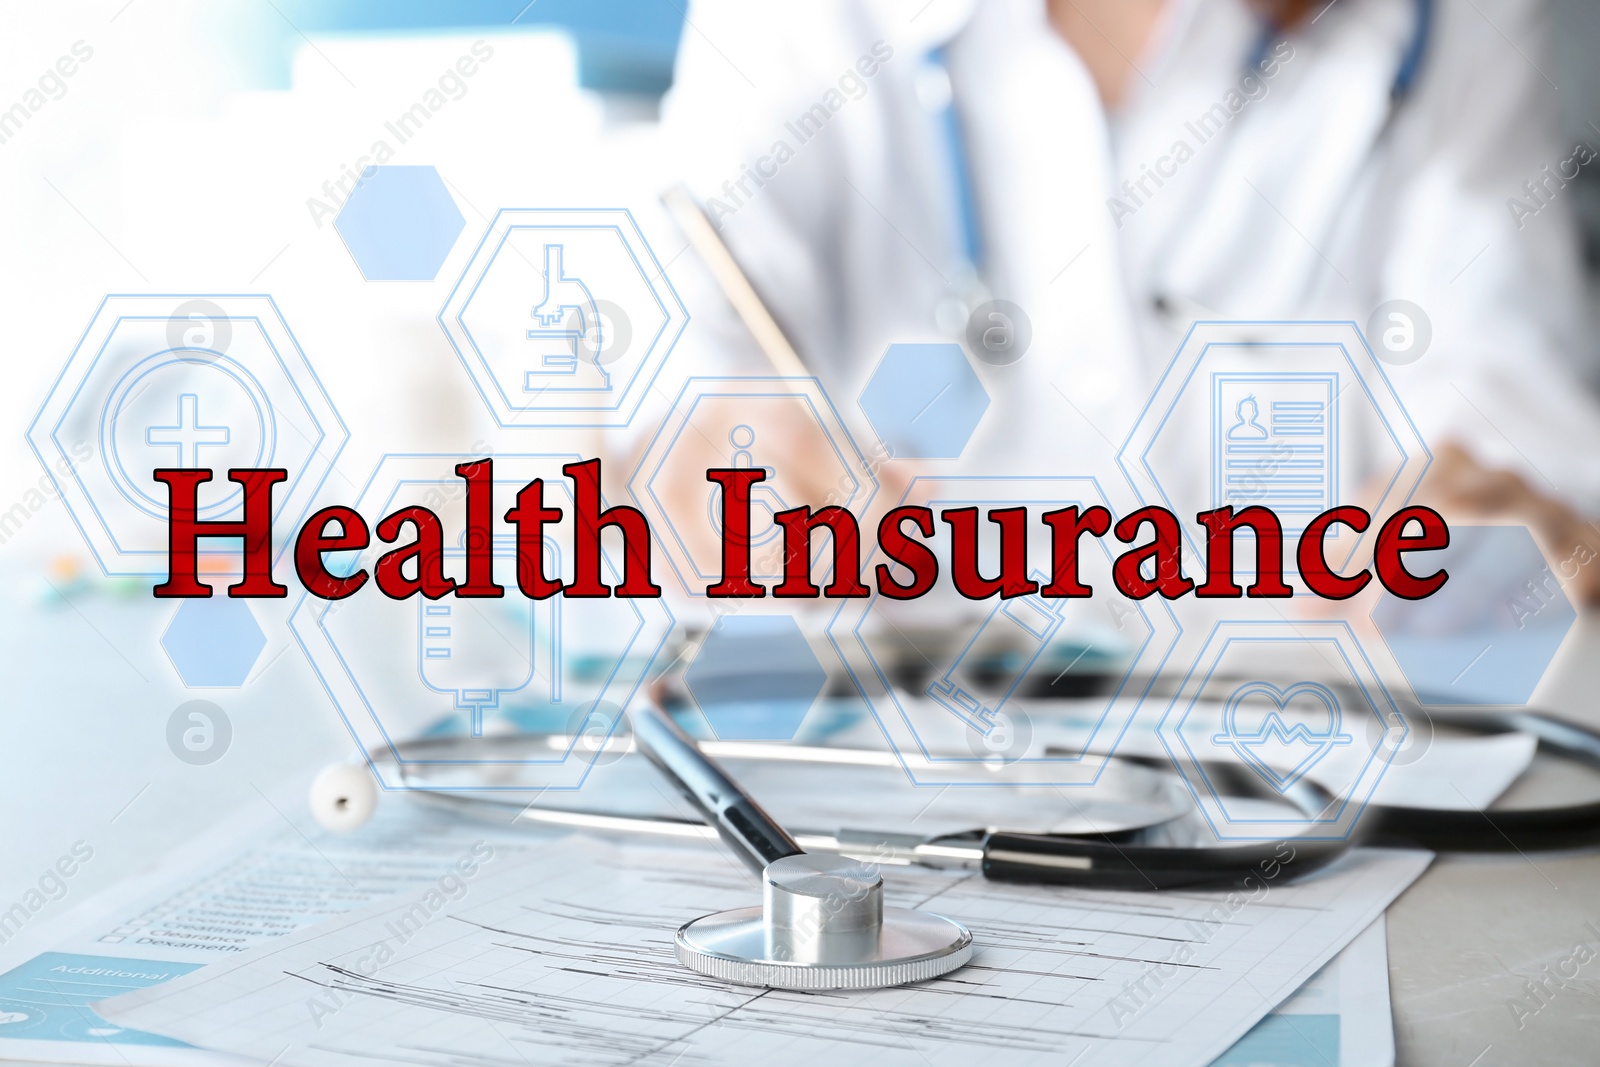 Image of Phrase Health Insurance, stethoscope, icons and blurred doctor on background